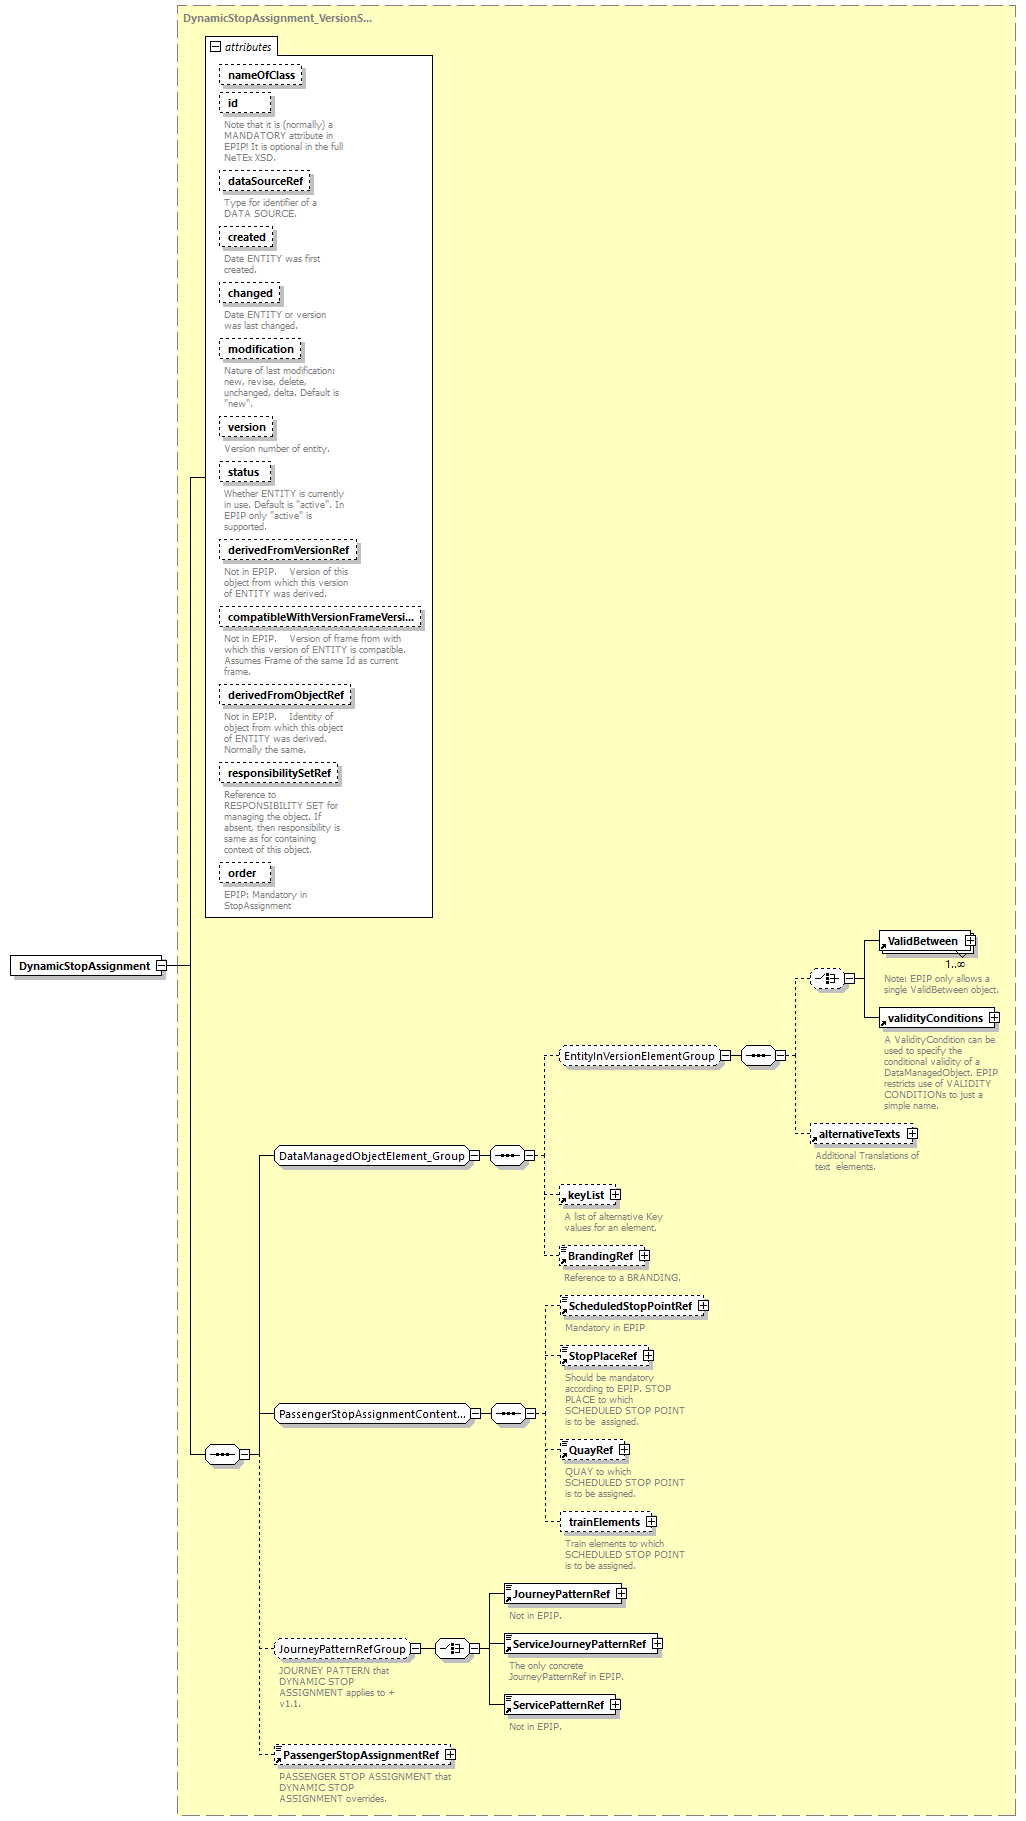 reduced_diagrams/reduced_p155.png